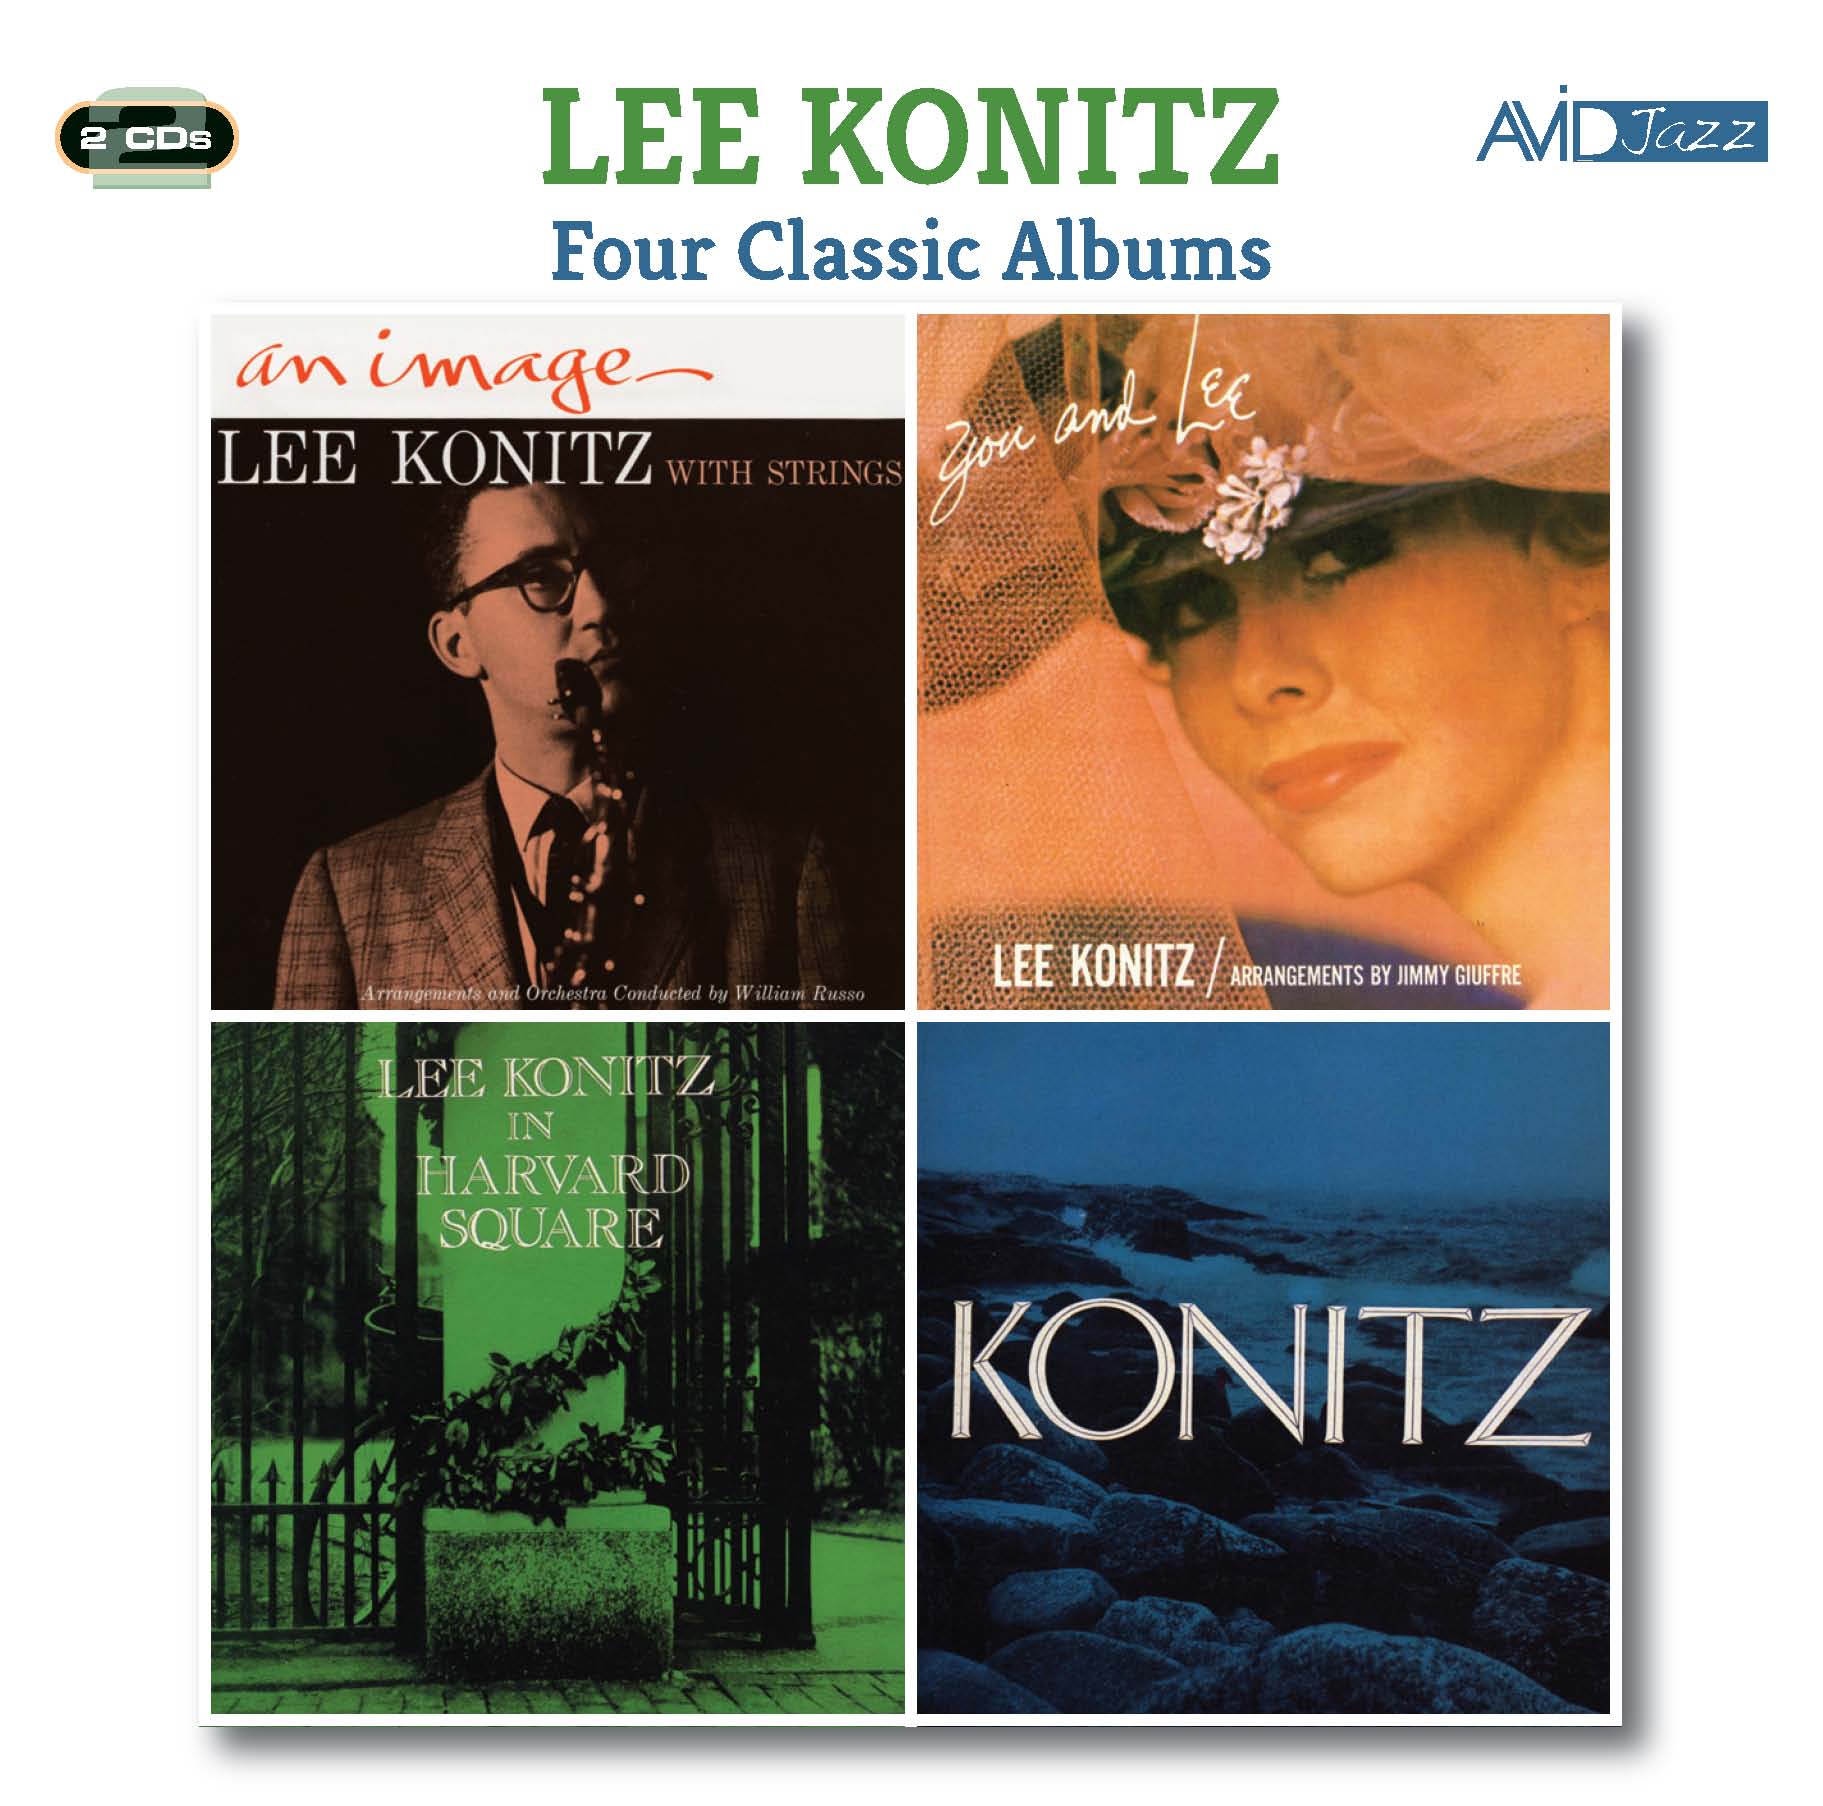 Lee Konitz: Four Classic Albums (An Image / You And Lee / In Harvard Square  / Konitz) (2CD)